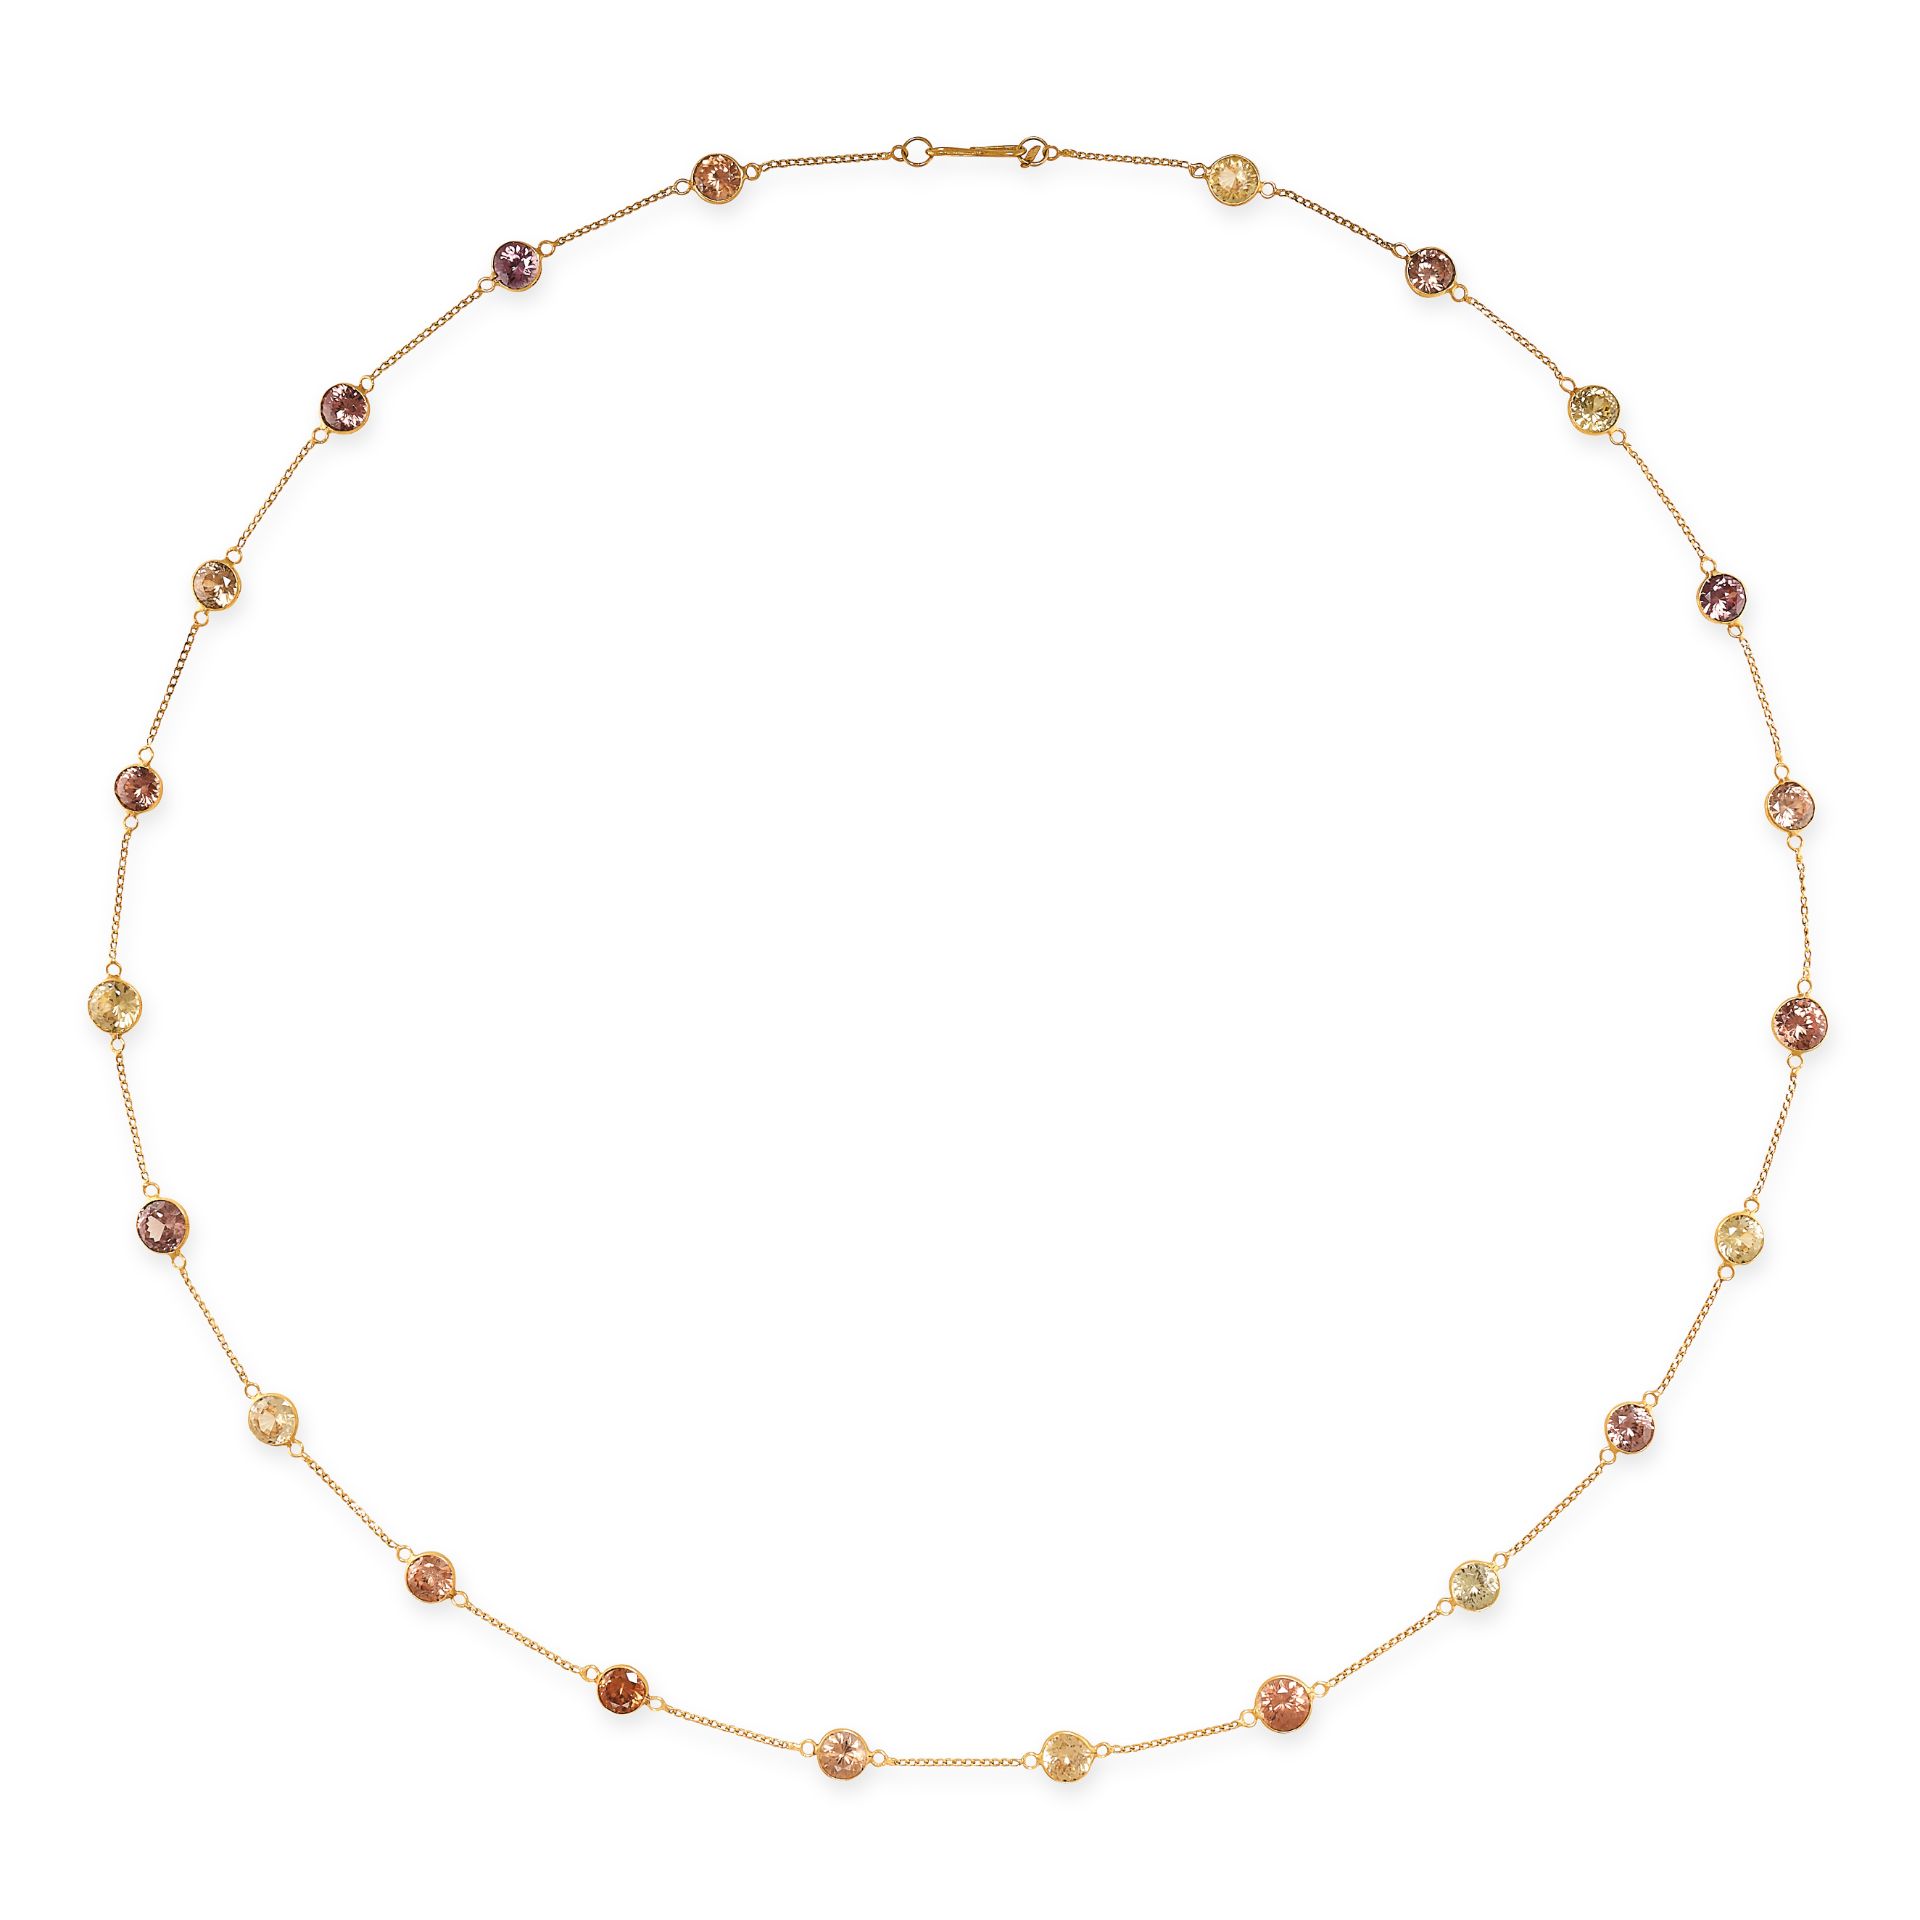 A COLOURED ZIRCON CHAIN NECKLACE in 14ct yellow gold, comprising a single row of twenty-two round